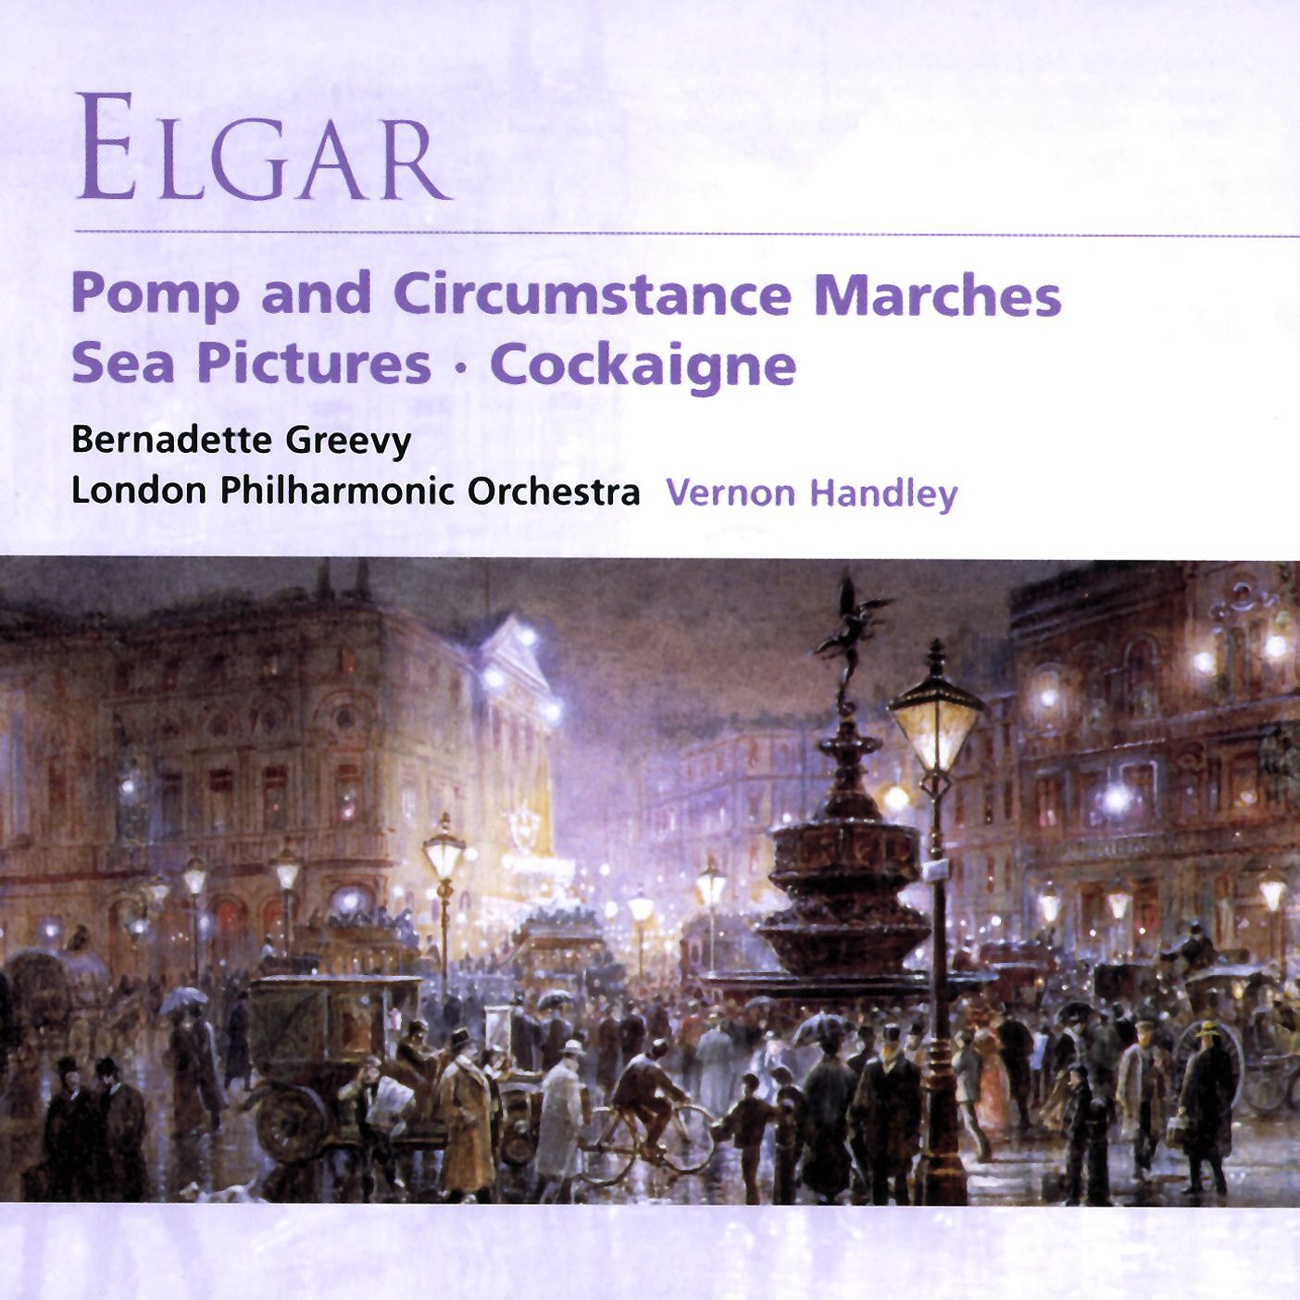 Pomp and Circumstance - Military Marches Op. 39: No. 3 in C minor